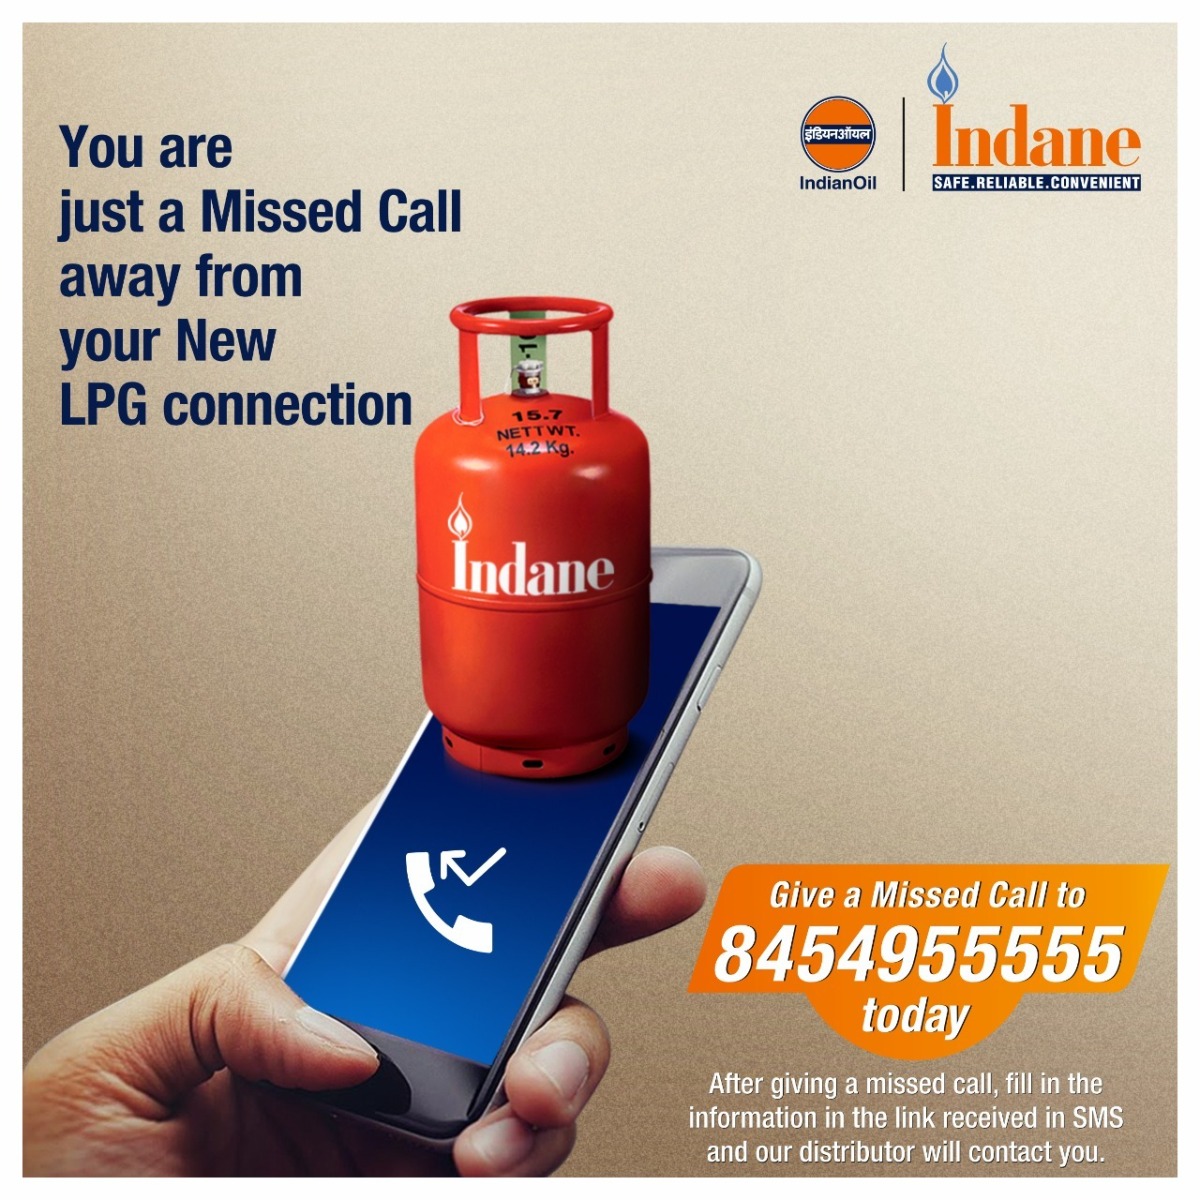 Your new #Indane LPG connection only a Missed Call away! Dial 8454955555 and get LPG connection at your doorsteps. Existing Indane customers can also book a refill by giving us a missed call from their registered phone number.